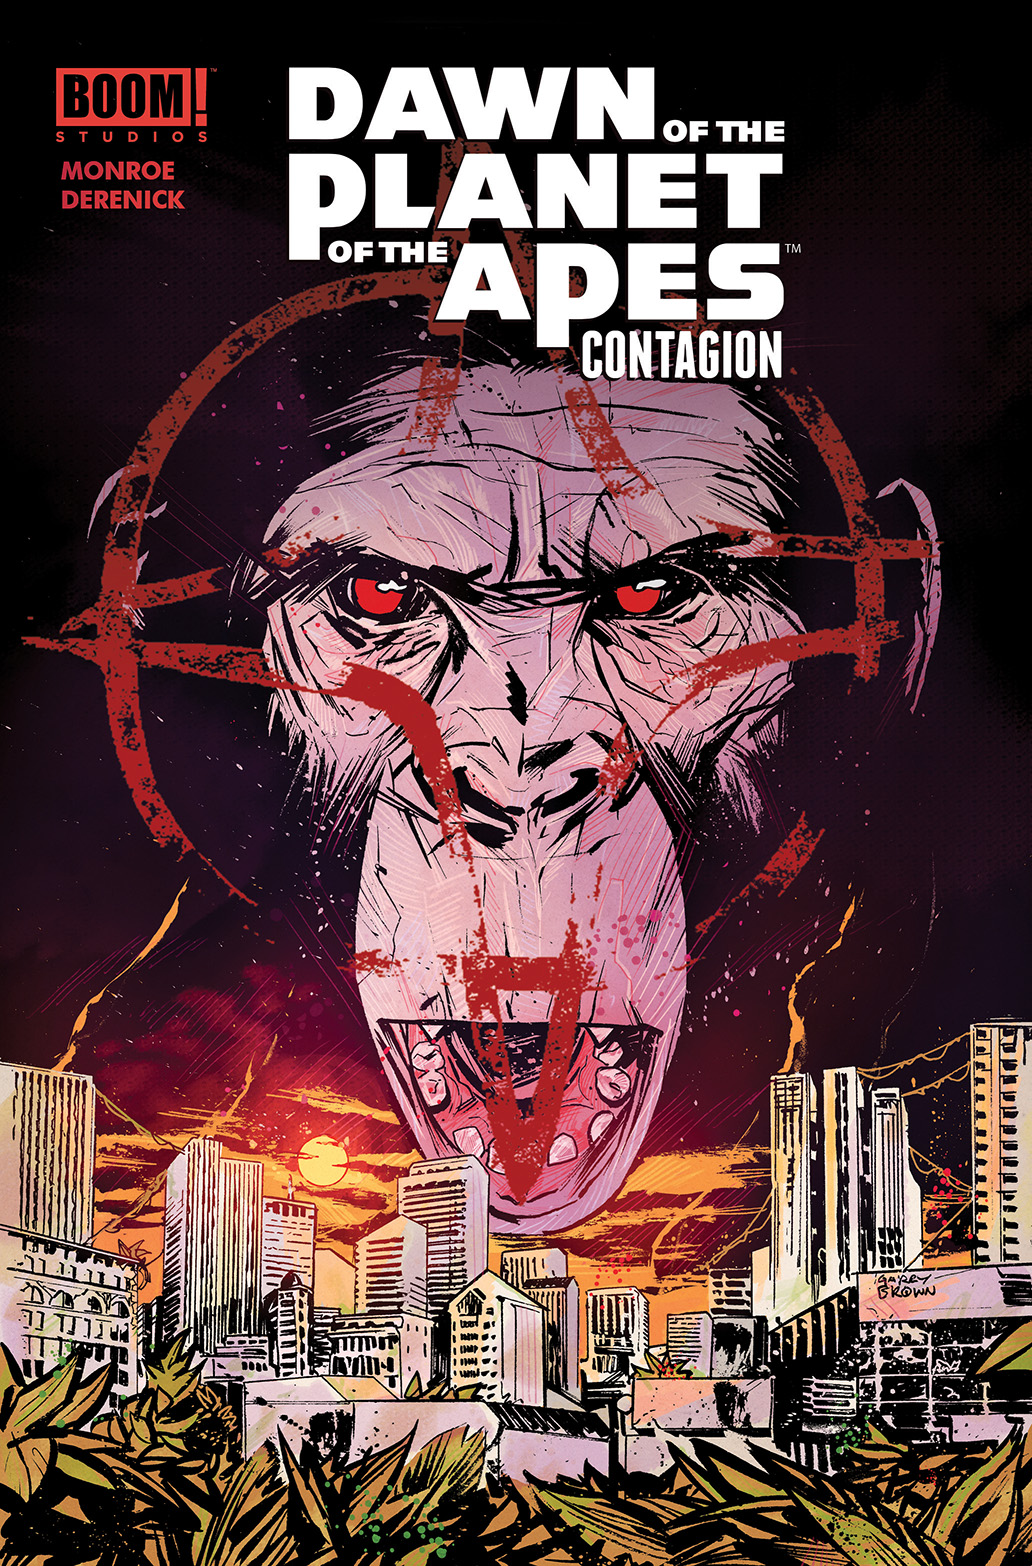 DAWN OF THE PLANET APES: CONTAGION